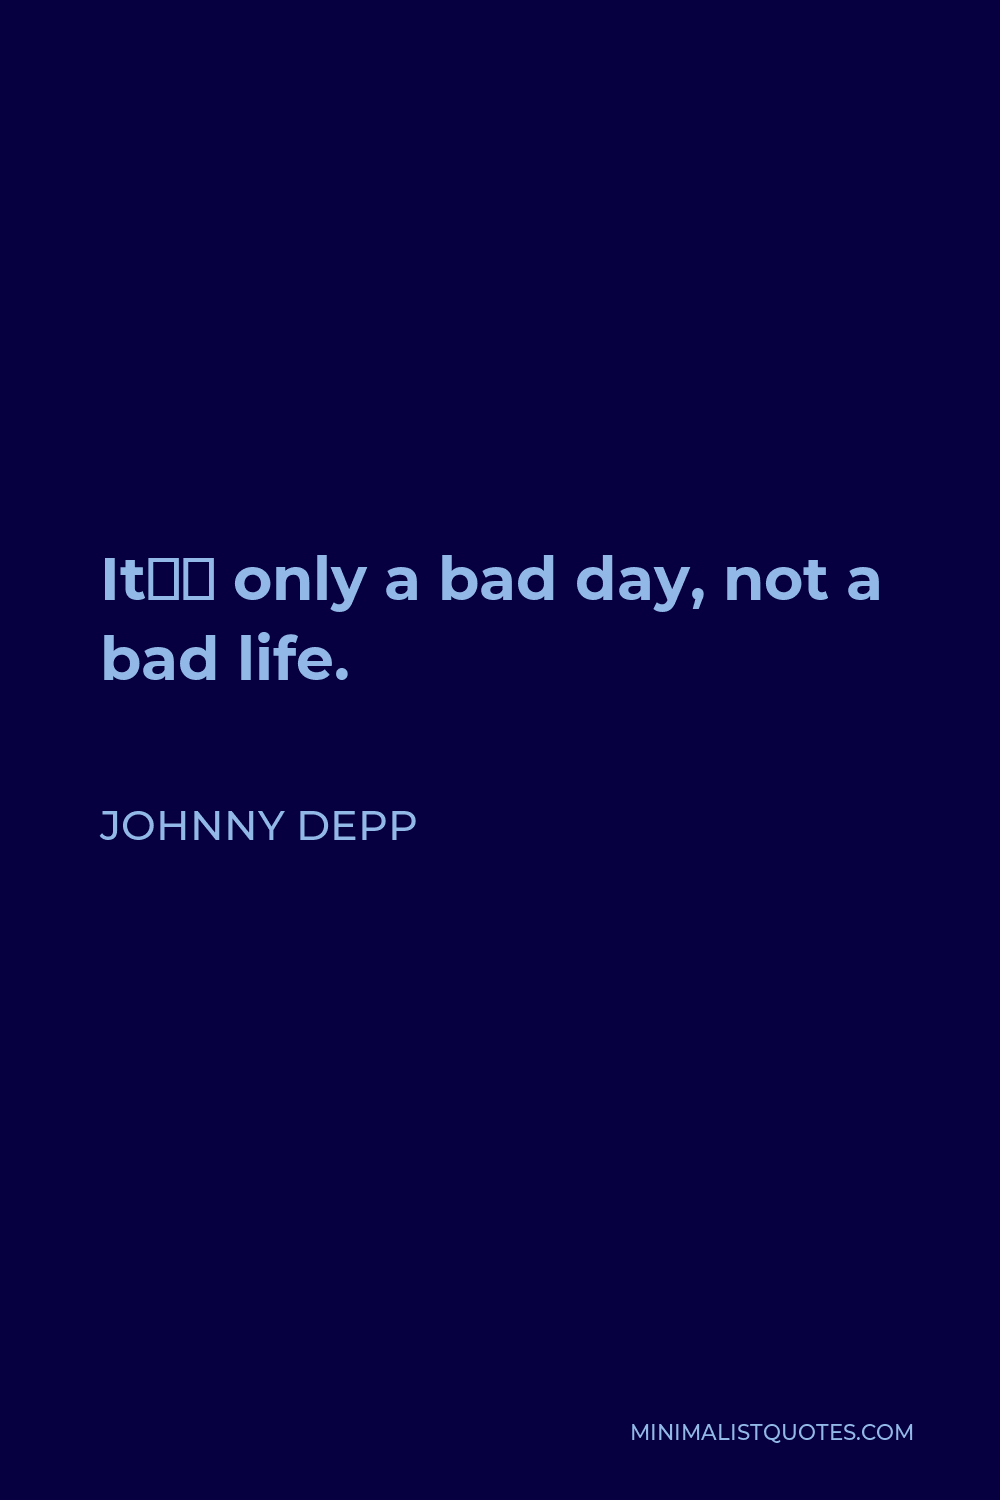 Johnny Depp Quote - It’s only a bad day, not a bad life.